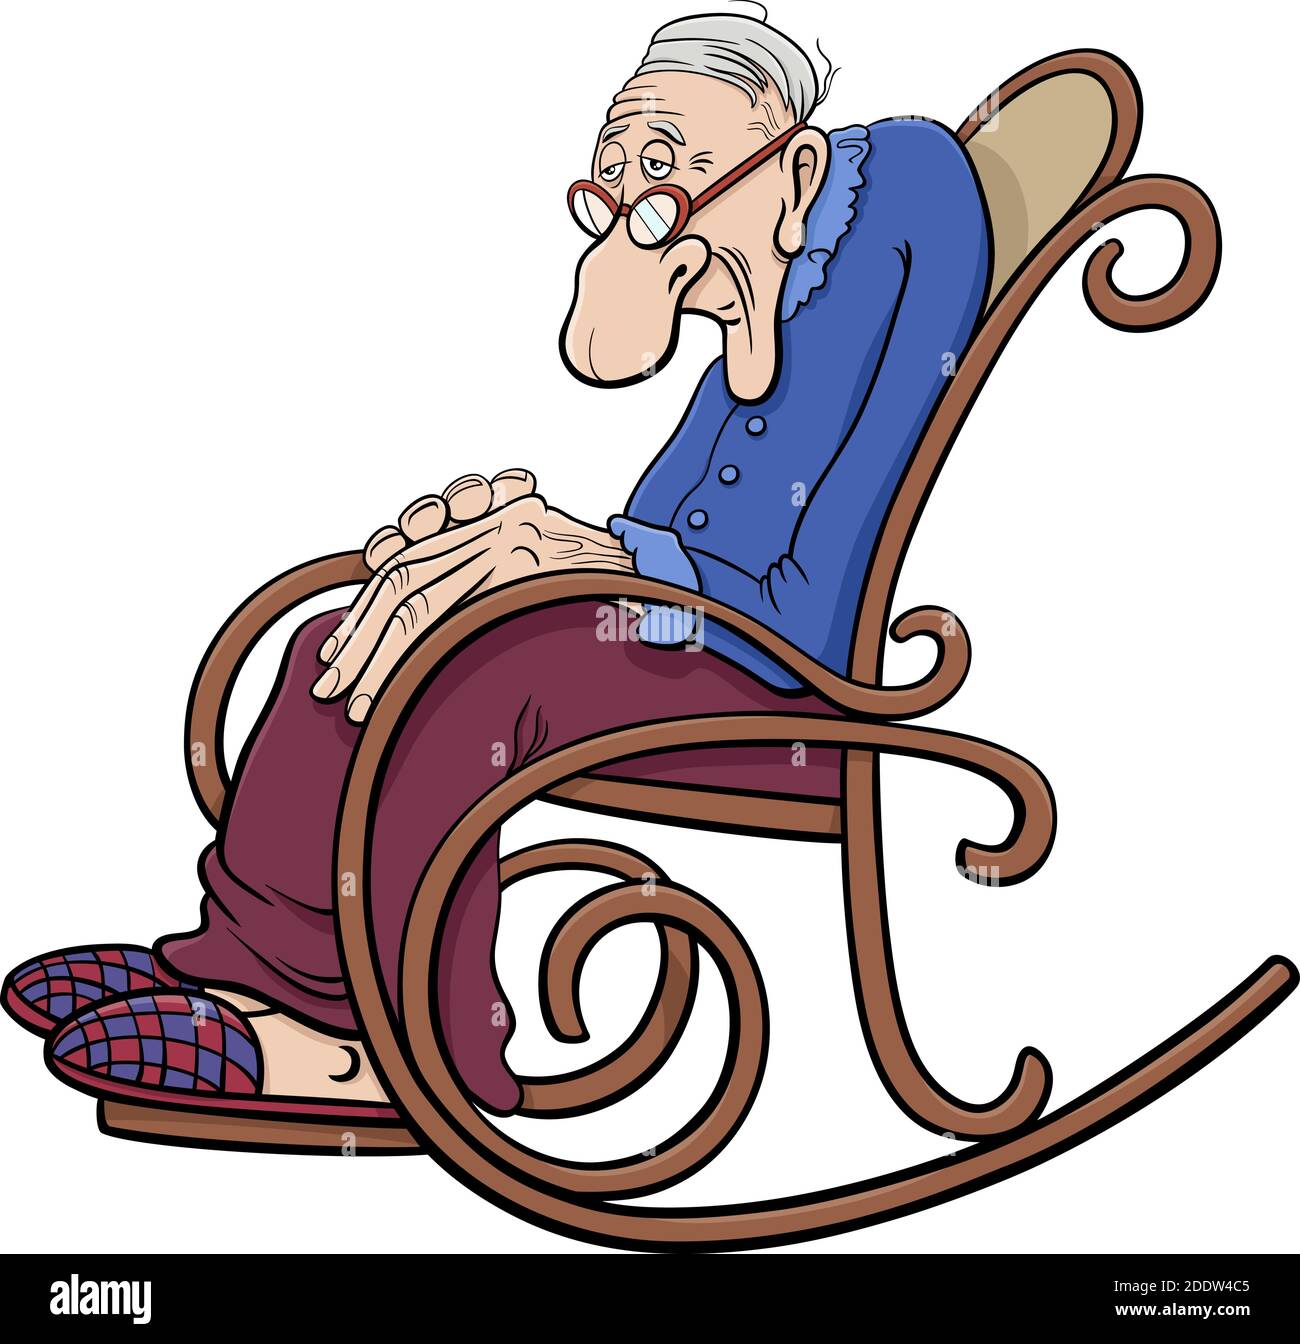 Cartoon illustration of mature age man senior or grandfather in the rocking chair Stock Vector